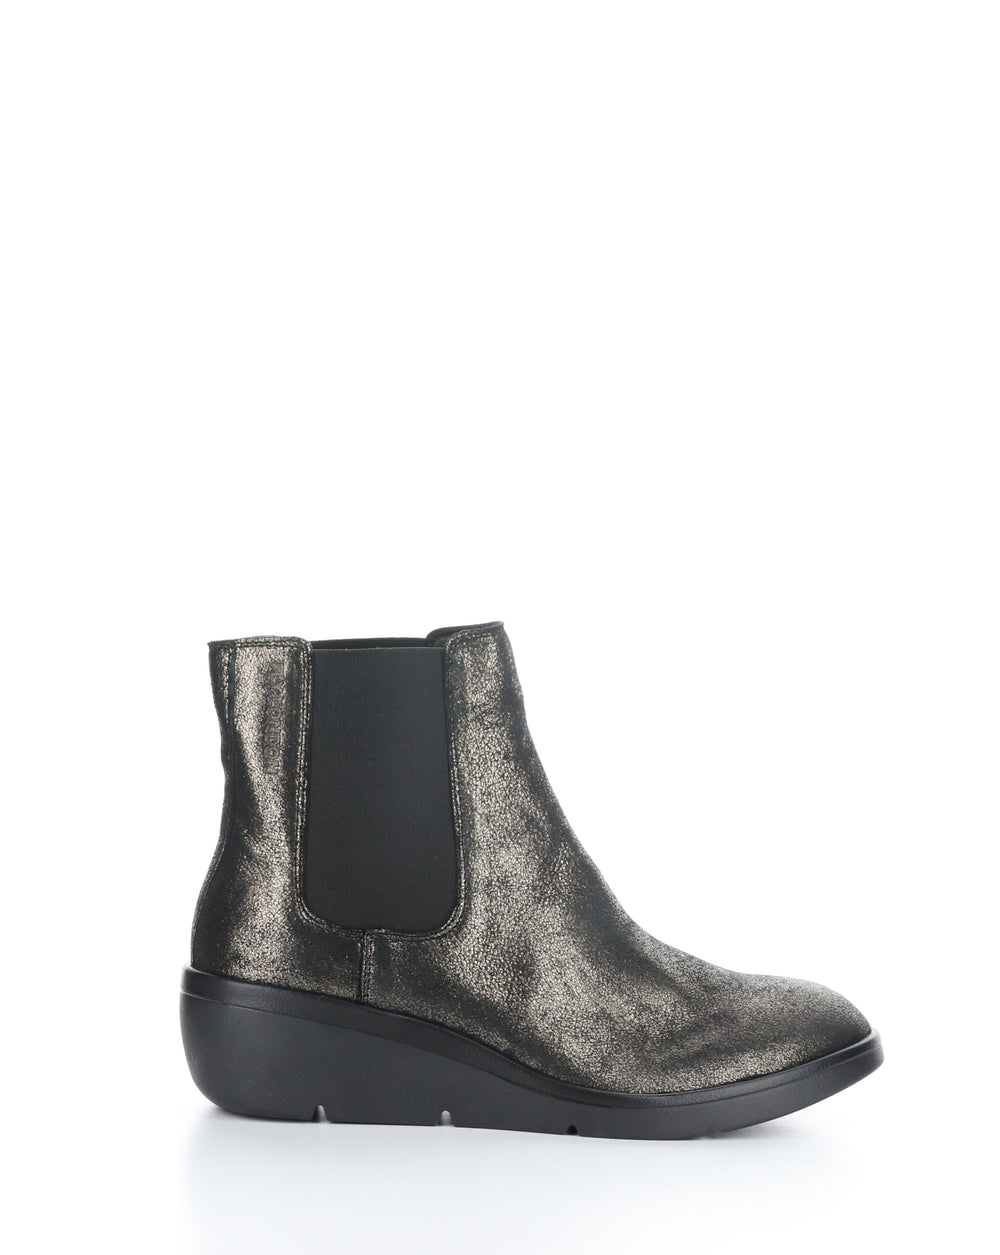 NOLA549FLY 011 GRAPHITE Elasticated Boots